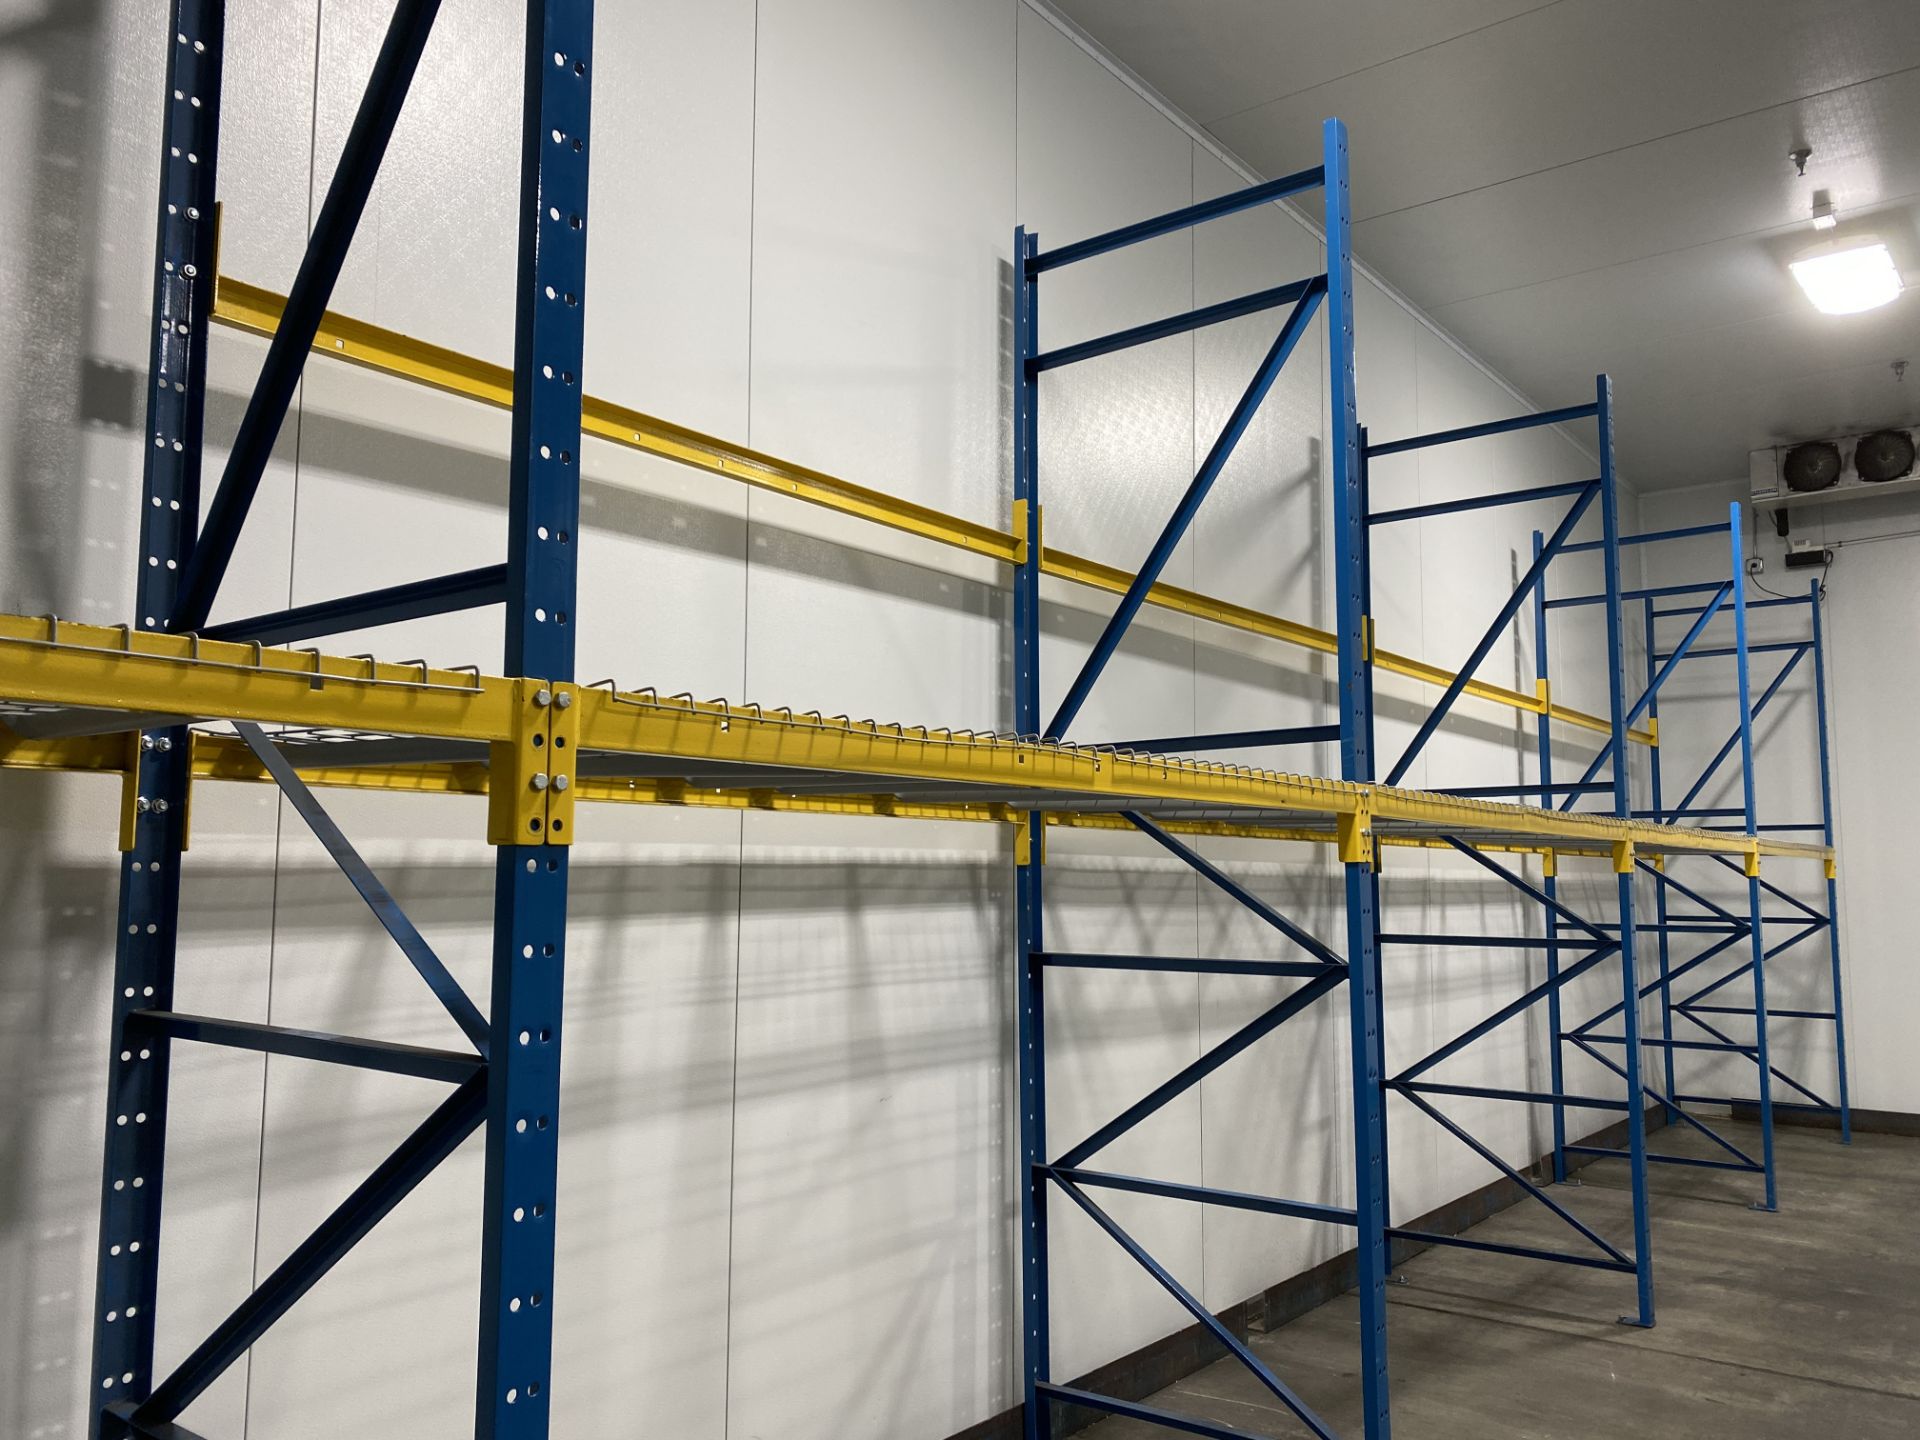 Lot of structural steel pallet racking including (12) 42" X 18' uprights, (20) bolt in 96" cross